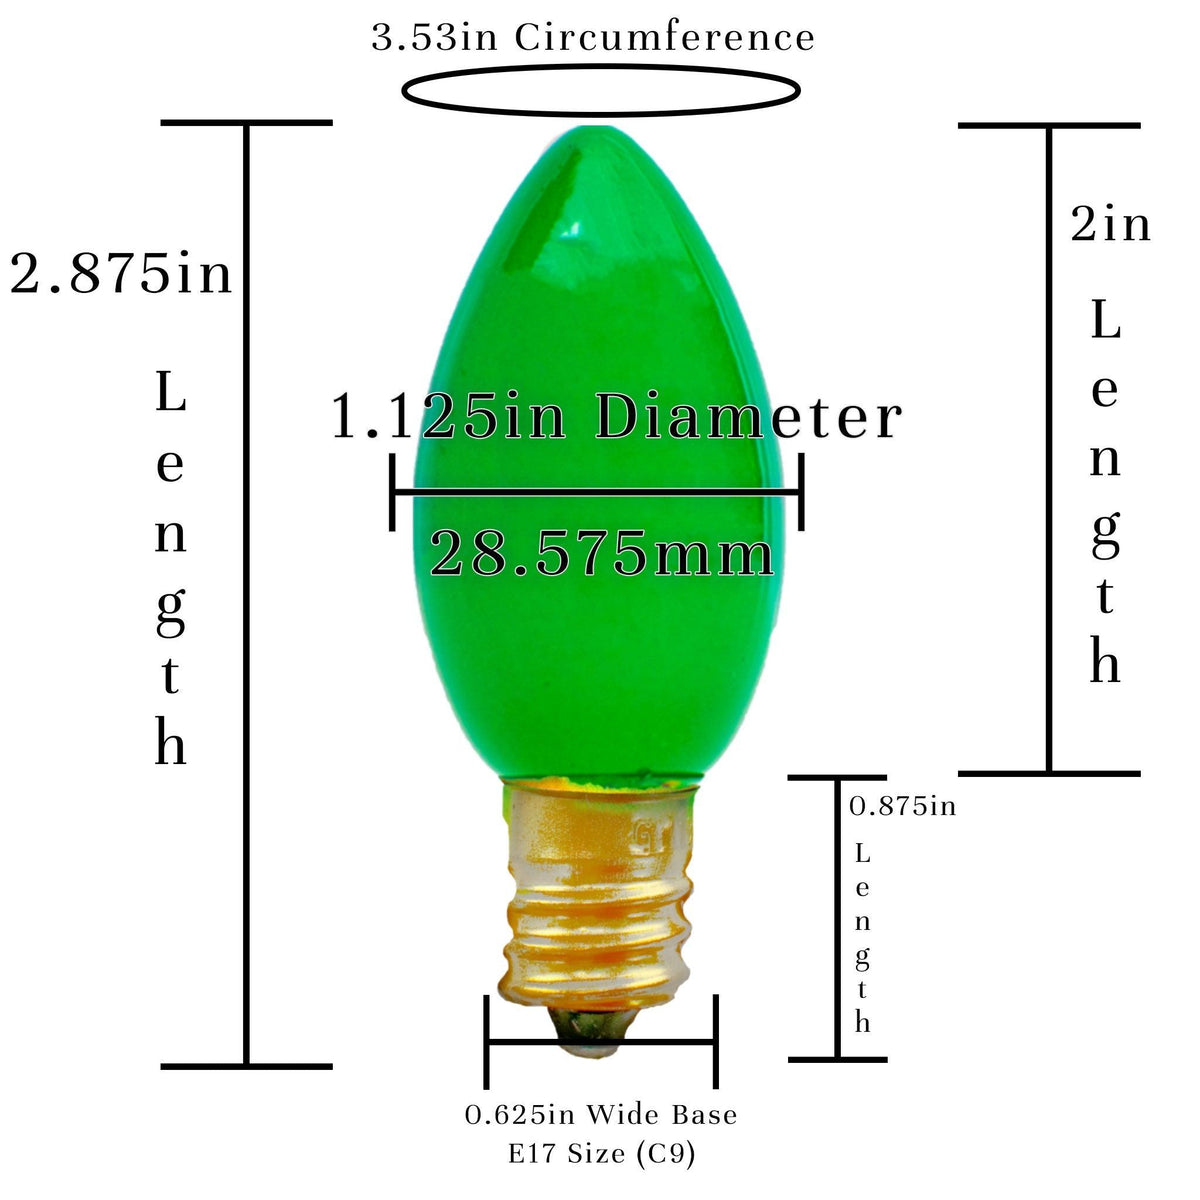 Size of a C9 Light Bulb in Solid Green color.  On sale at leedisplay.com